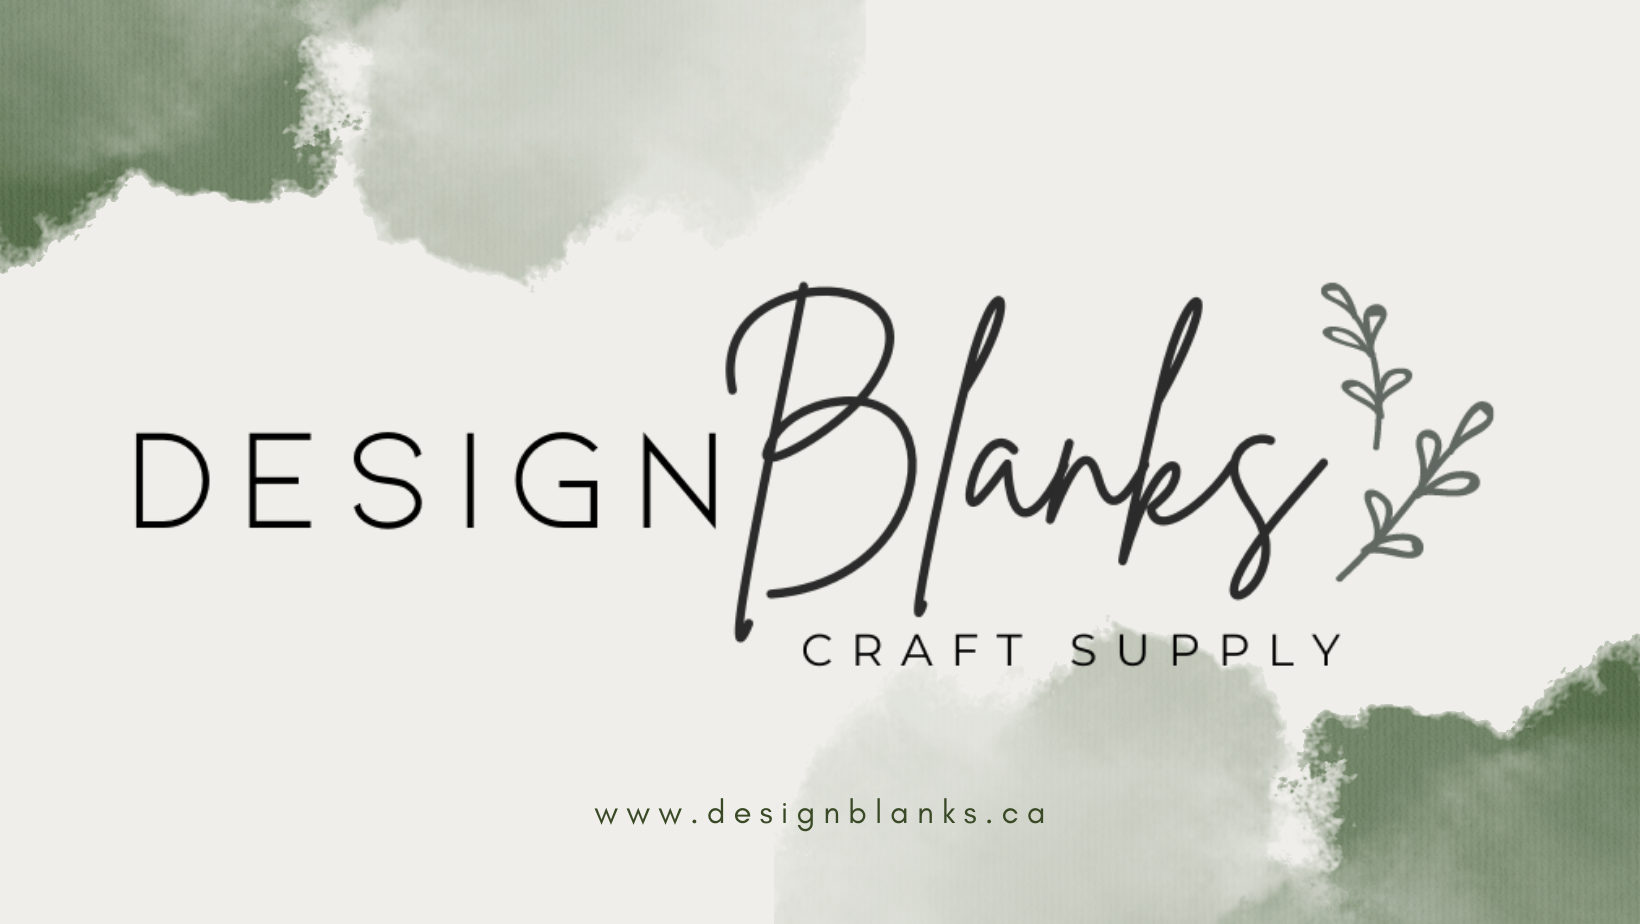 Design Blanks Canada - Wholesale Craft Blanks & Supplies for Makers!